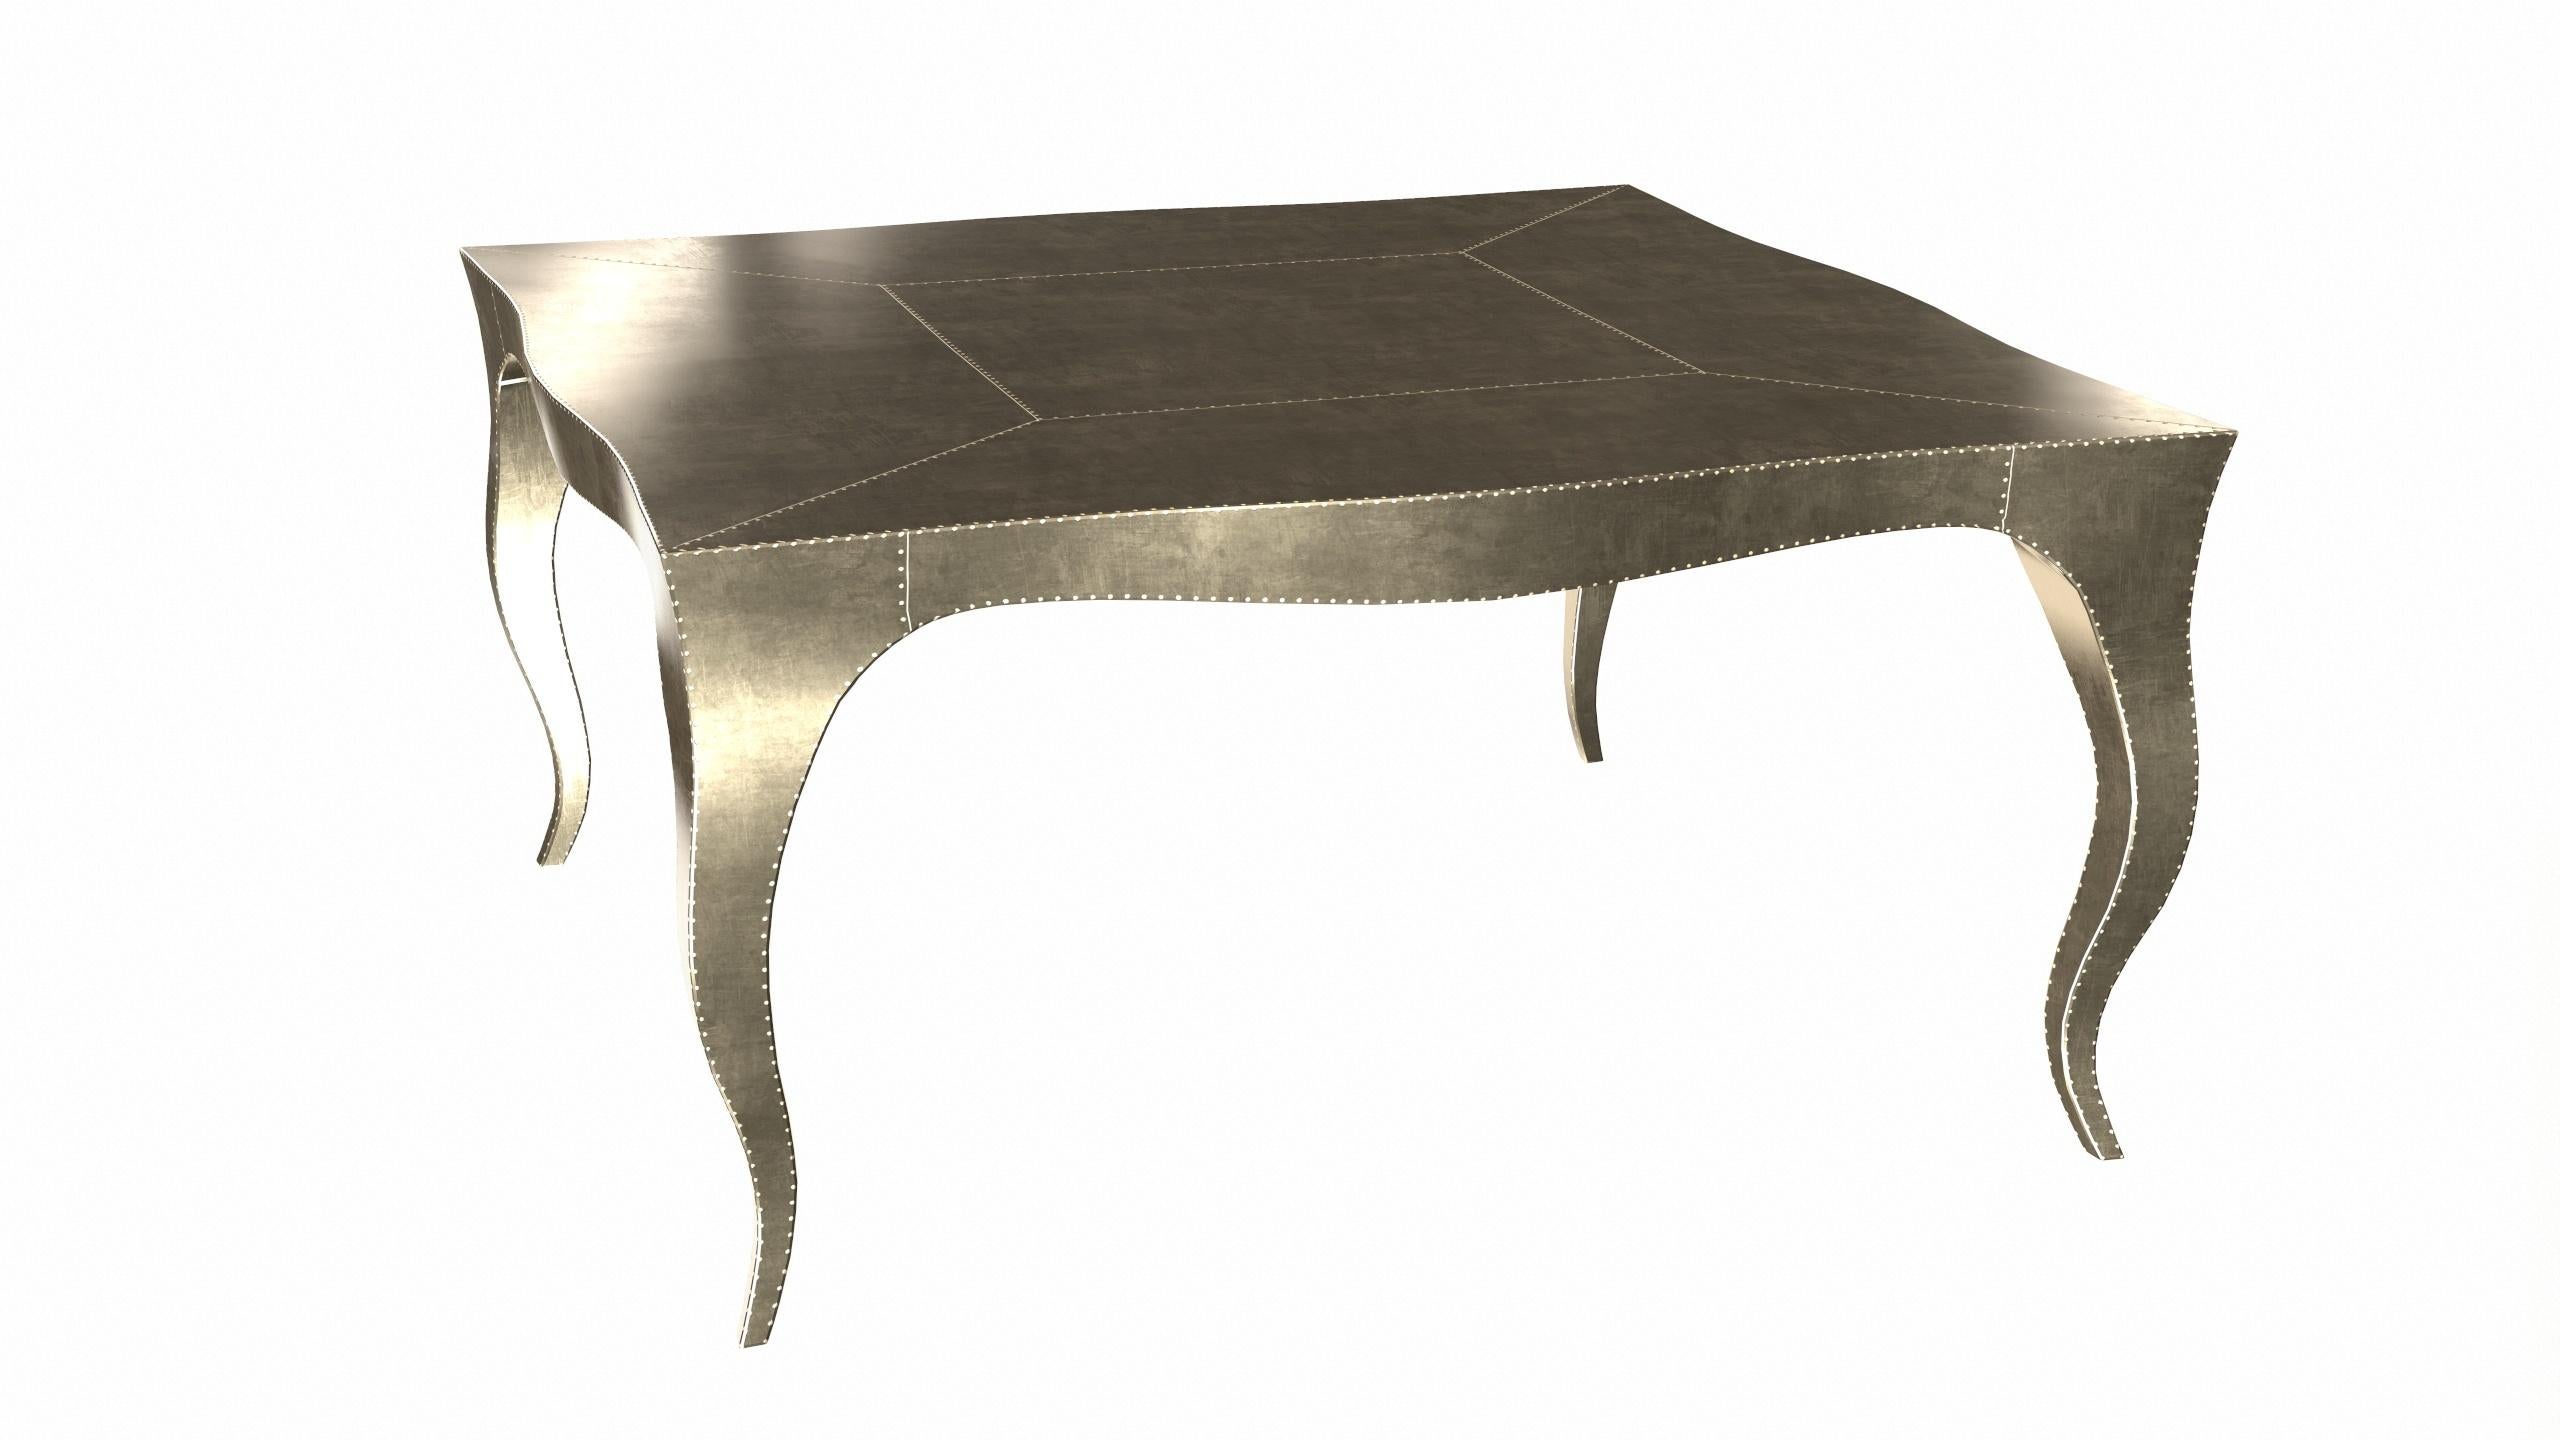 Louise Art Deco Nesting Tables Smooth Brass 18.5x18.5x10 inch by Paul M For Sale 3